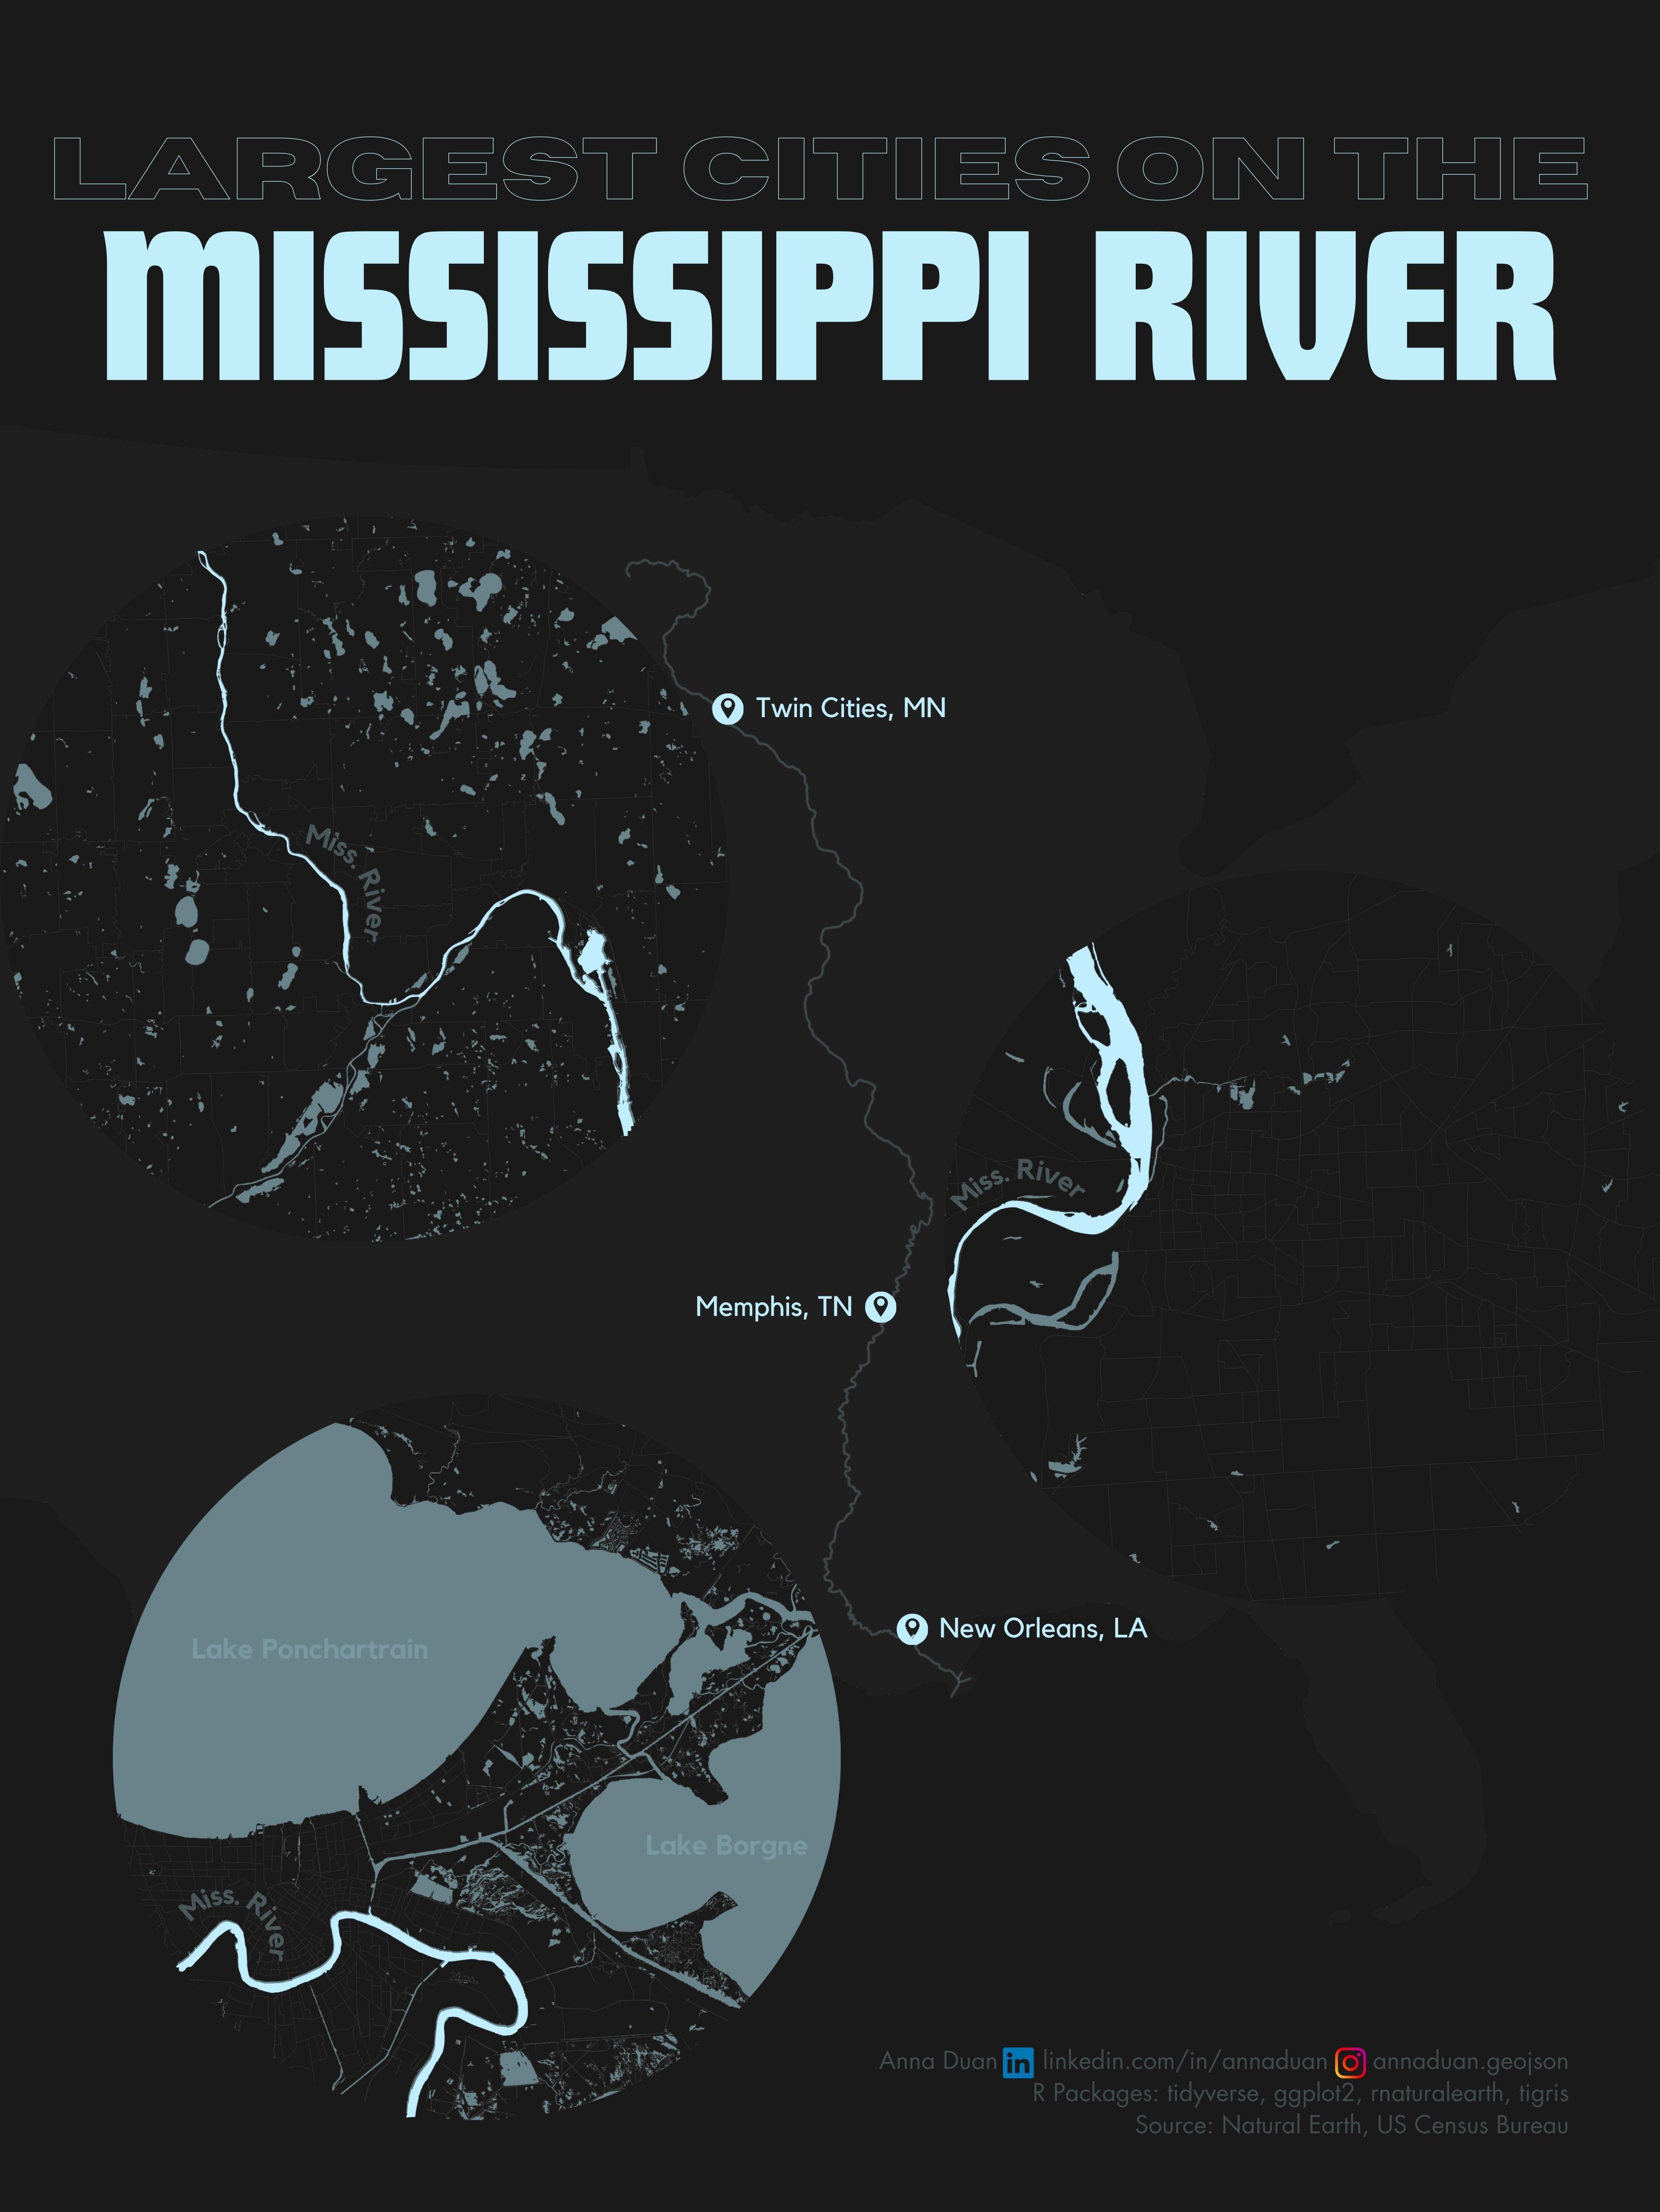 Biggest cities on the Mississippi River by Anna Duan